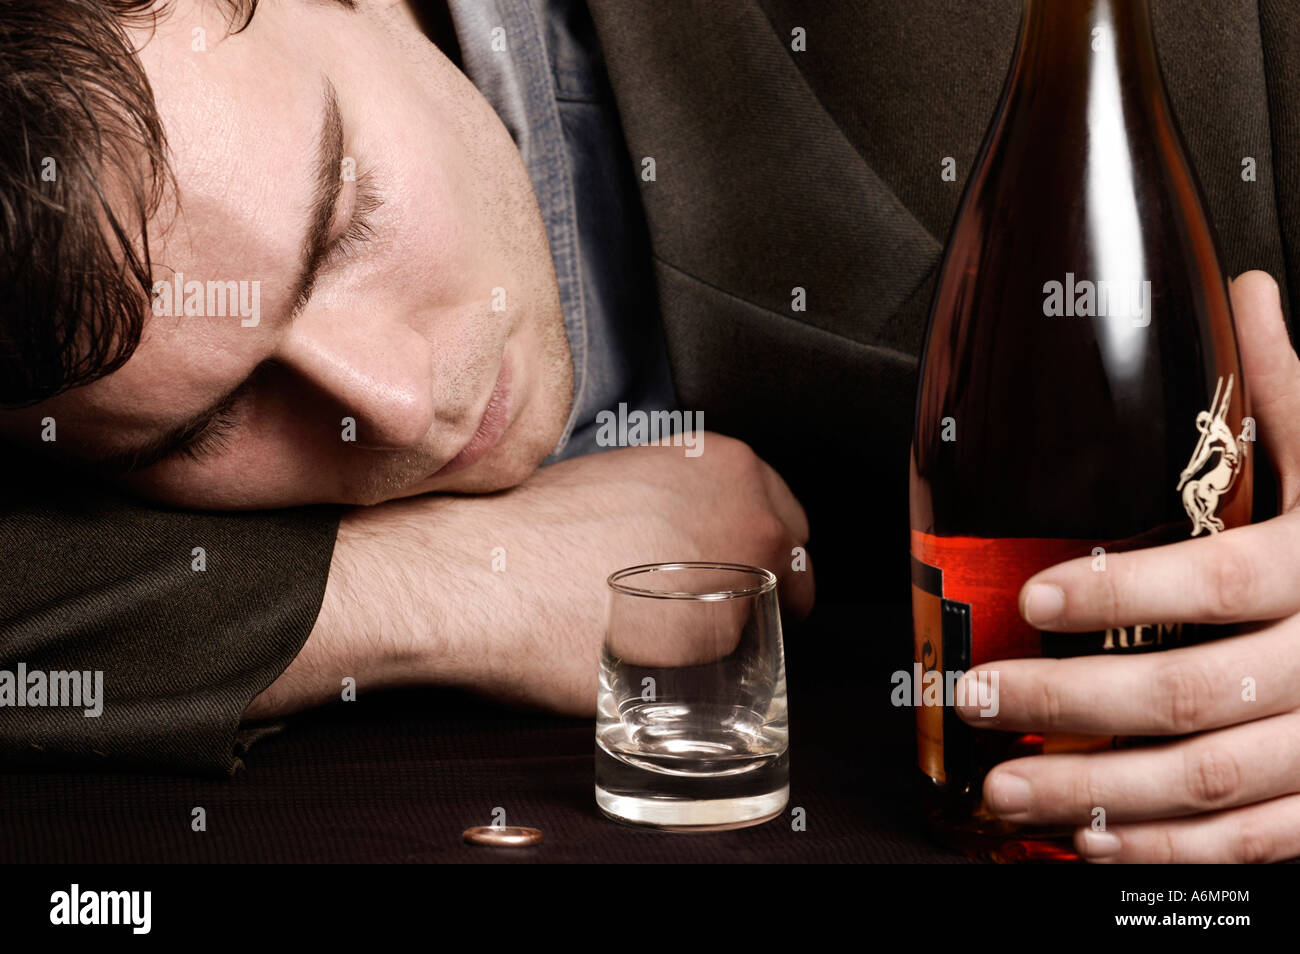 Drunk man with a bottle of cognac Stock Photo